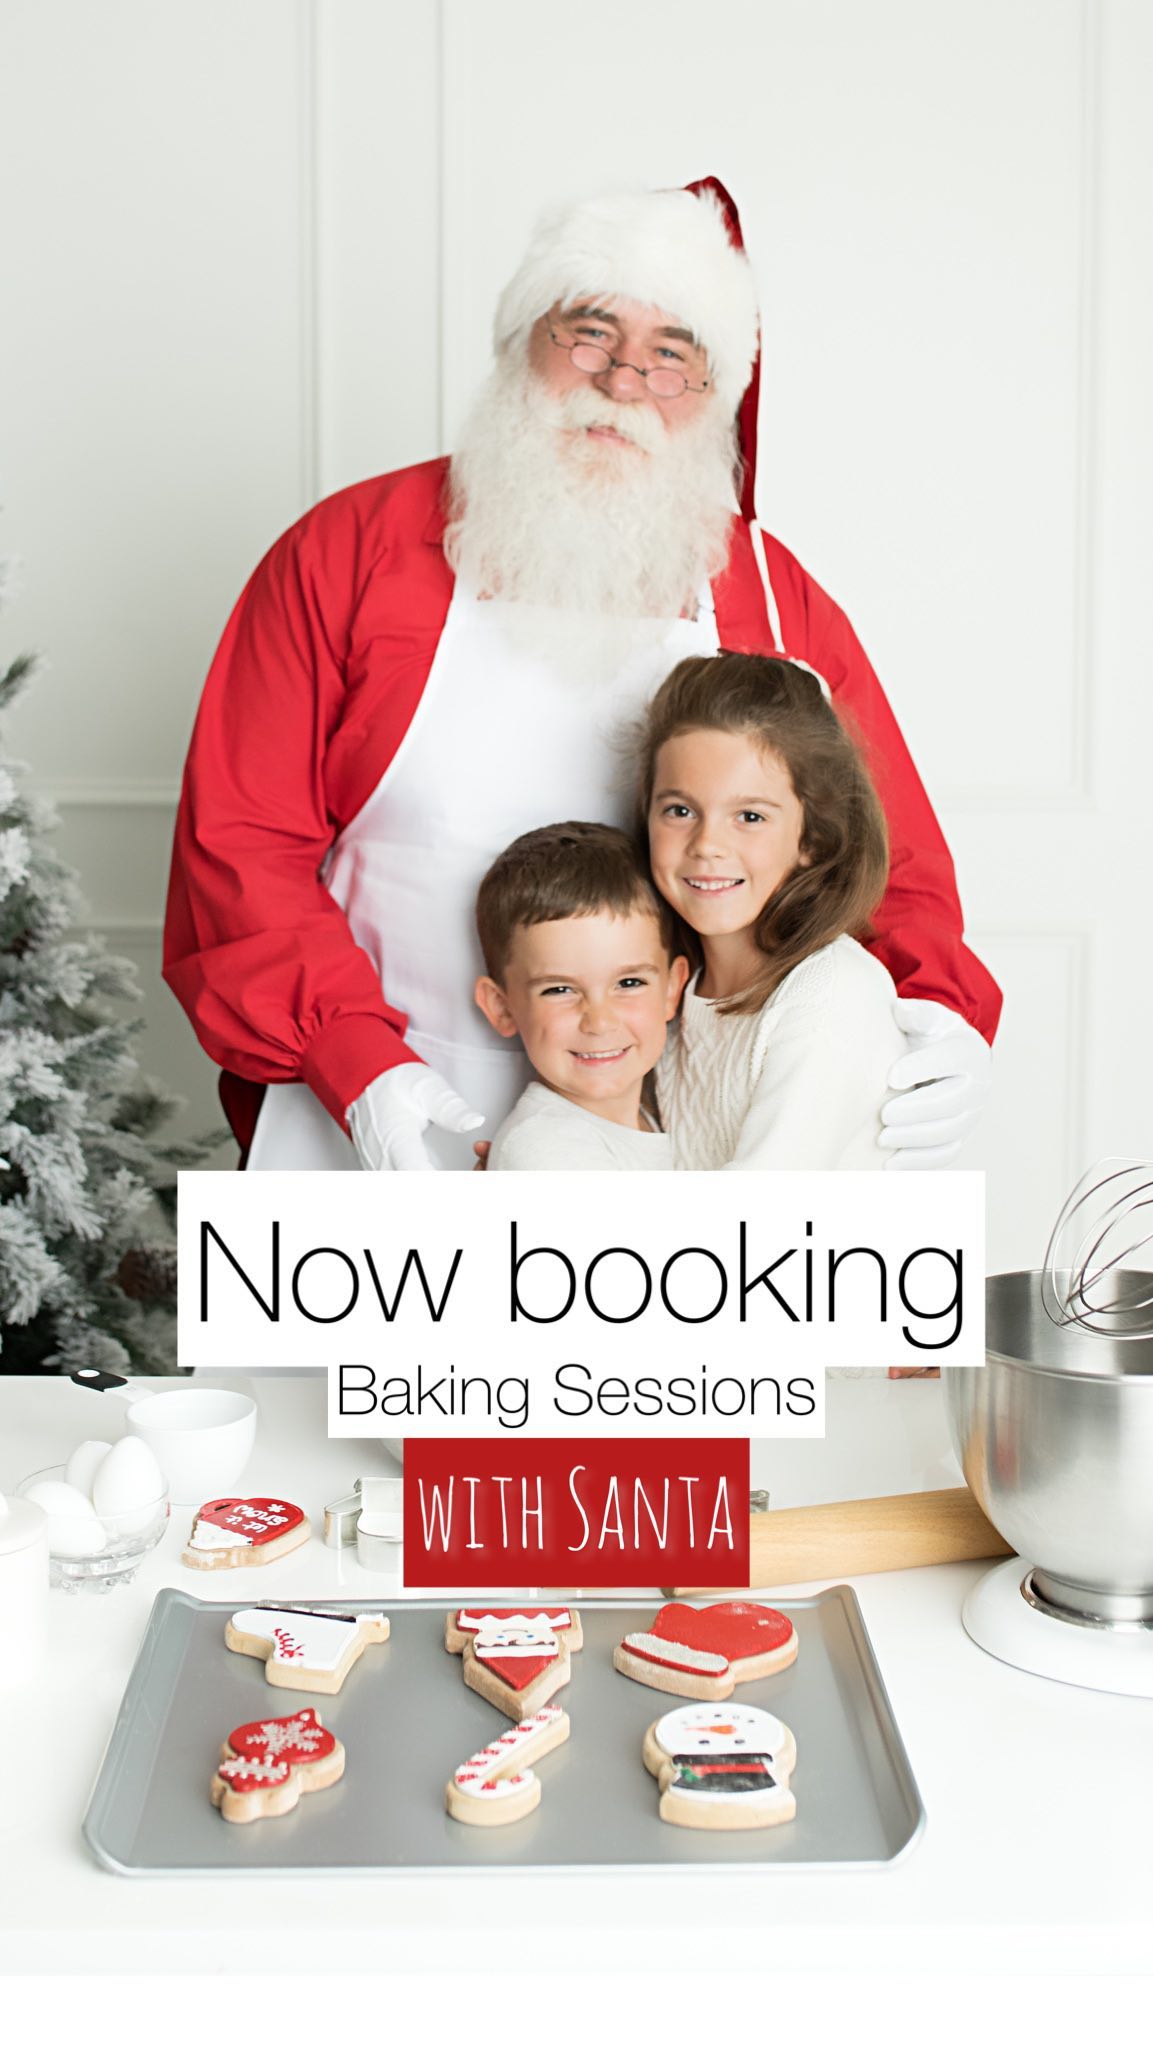 🌲 it’s that time of year again….
These sessions will be held on Saturday Oct 29th and Sunday Oct 30th.
(It’s a bit early, BUT that’s when he was available and on the plus side, you’ll get your images faster and in time for Christmas cards!)

🌲 🌲 For those interested in baking, but not with Santa, I will have some times available at a discounted price the morning of Oct 30th to choose from.

Your collection includes:
- Time & talent during the session
- Post production of the images
- Children and family pictures included
- 15 - 20 minute session
- 7 high resolution digital images in colour and in black and white of your choice
- Online Gallery & Print Release
250 plus hst

🌲 Link in bio! 

#oshawanewbornphotographer
#oshawaphotographer #whitbynewbornphotographer #ajaxnewbornphotographer #bowmanvillenewbornphotographer #oshawanewbornphotography #oshawamoms #durhamregionmoms #gtanewbornphotographer #gtanewbornphotography #gtaphotographer #santasessions #santa #christmas #christmasseason